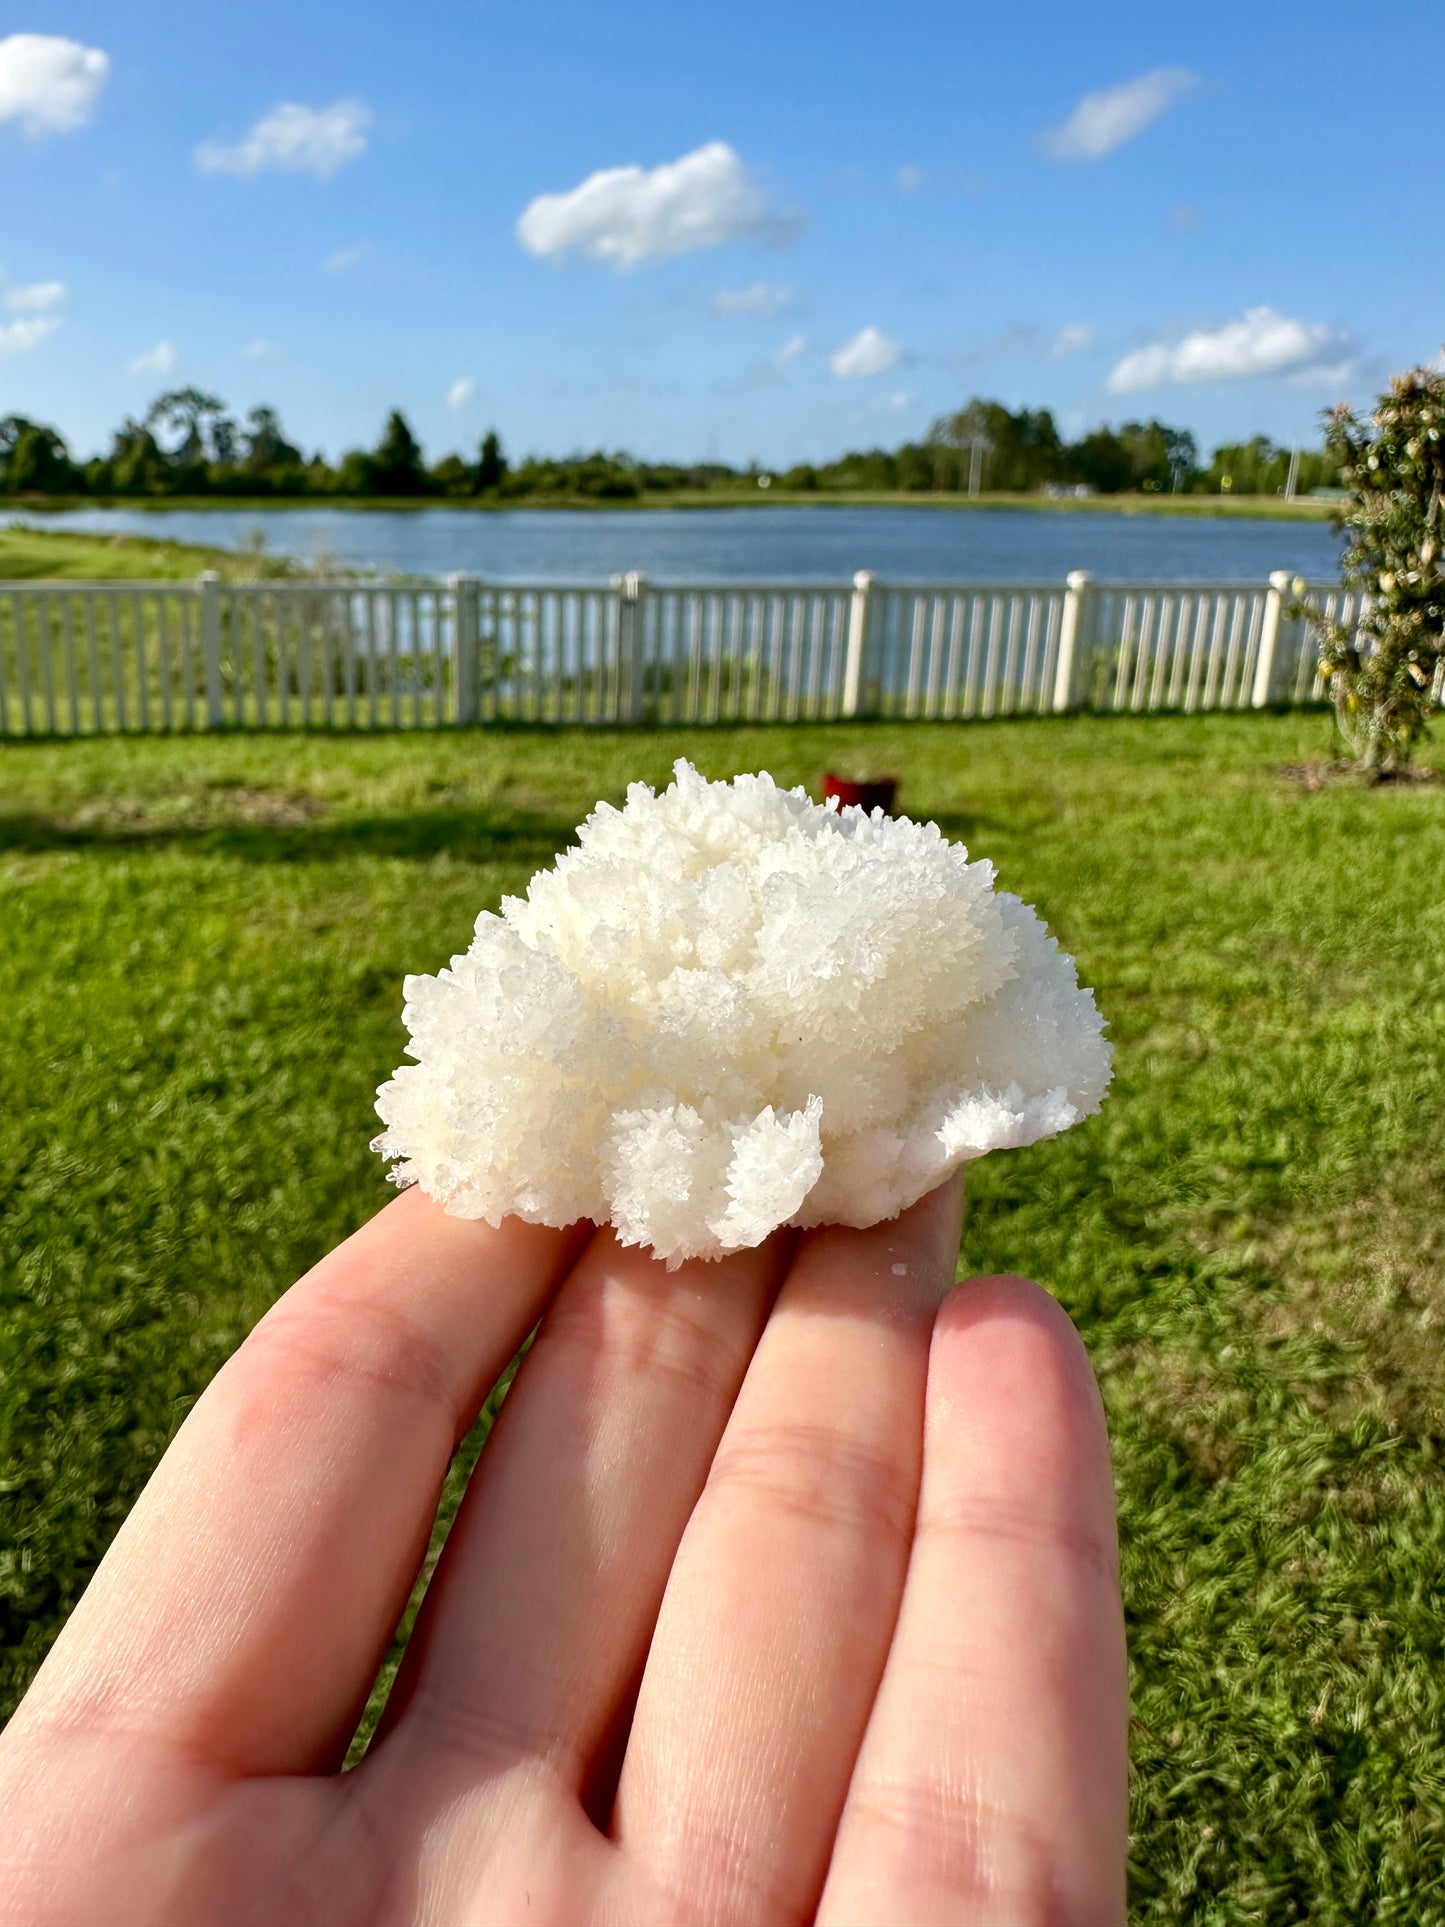 Aragonite Specimen - Stunning Natural Crystal for Collection, Perfect for Home Decor and Meditation, Enhances Earth Connection